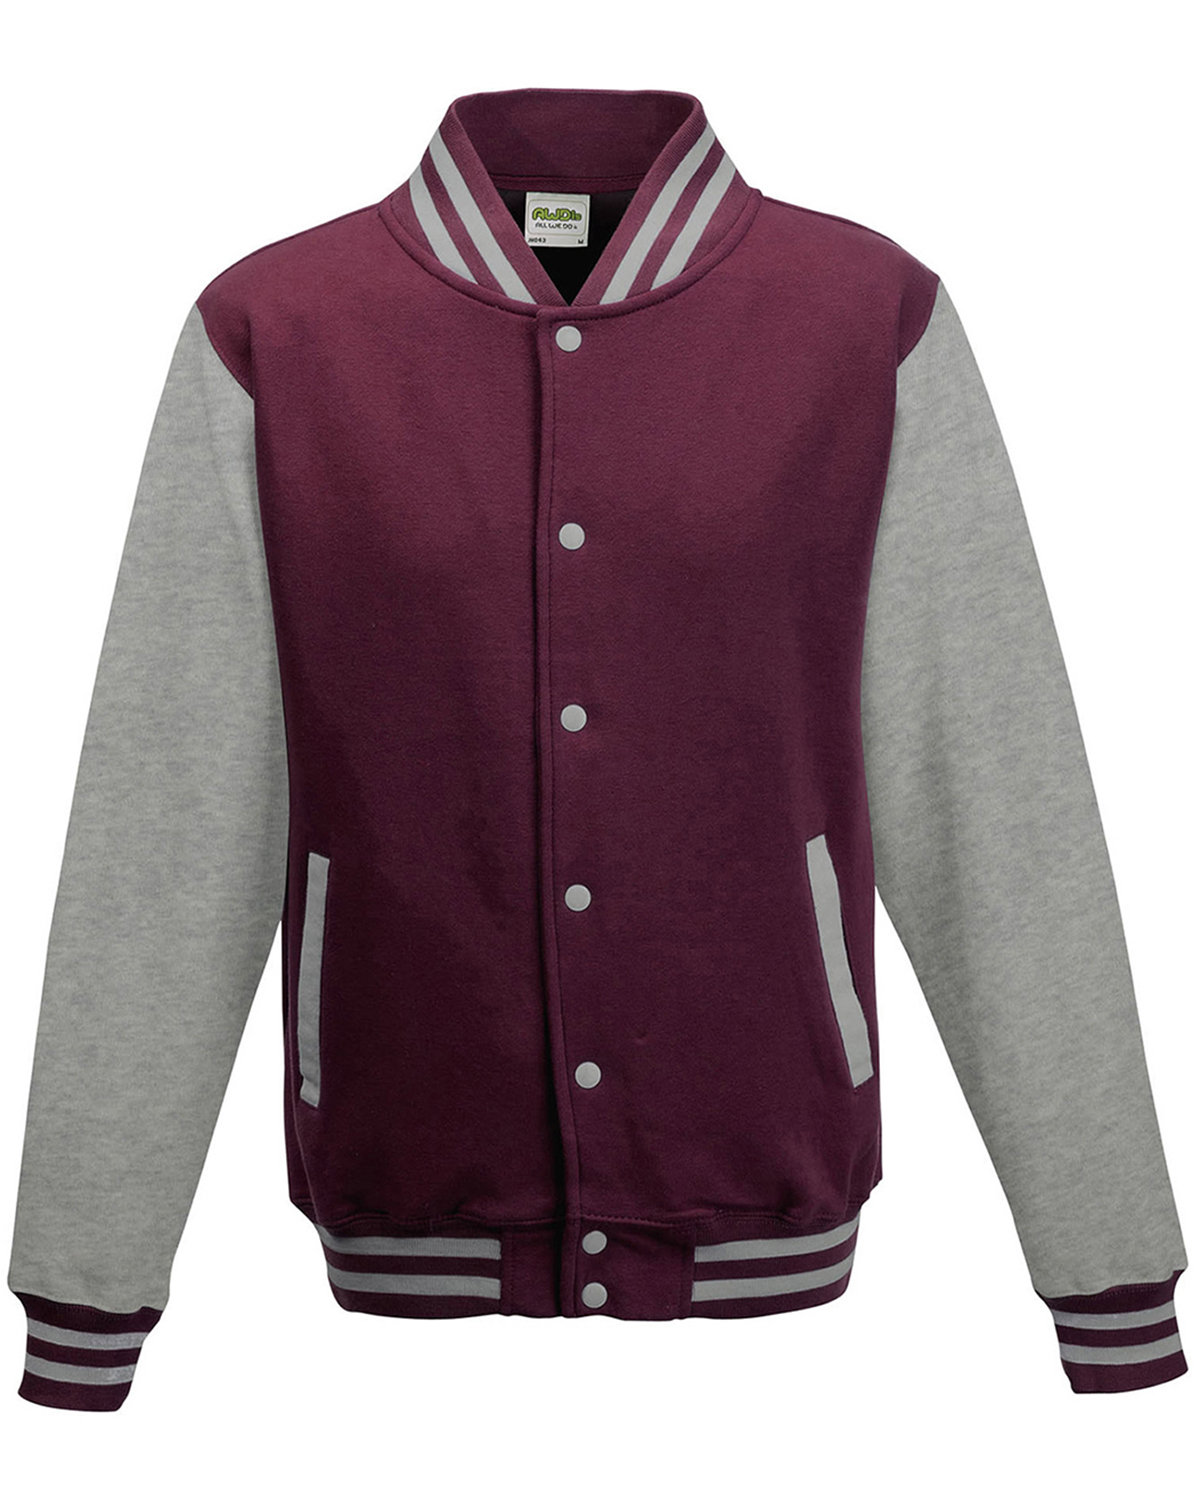 Mens Heavyweight Letterman Jacket-Just Hoods By AWDis